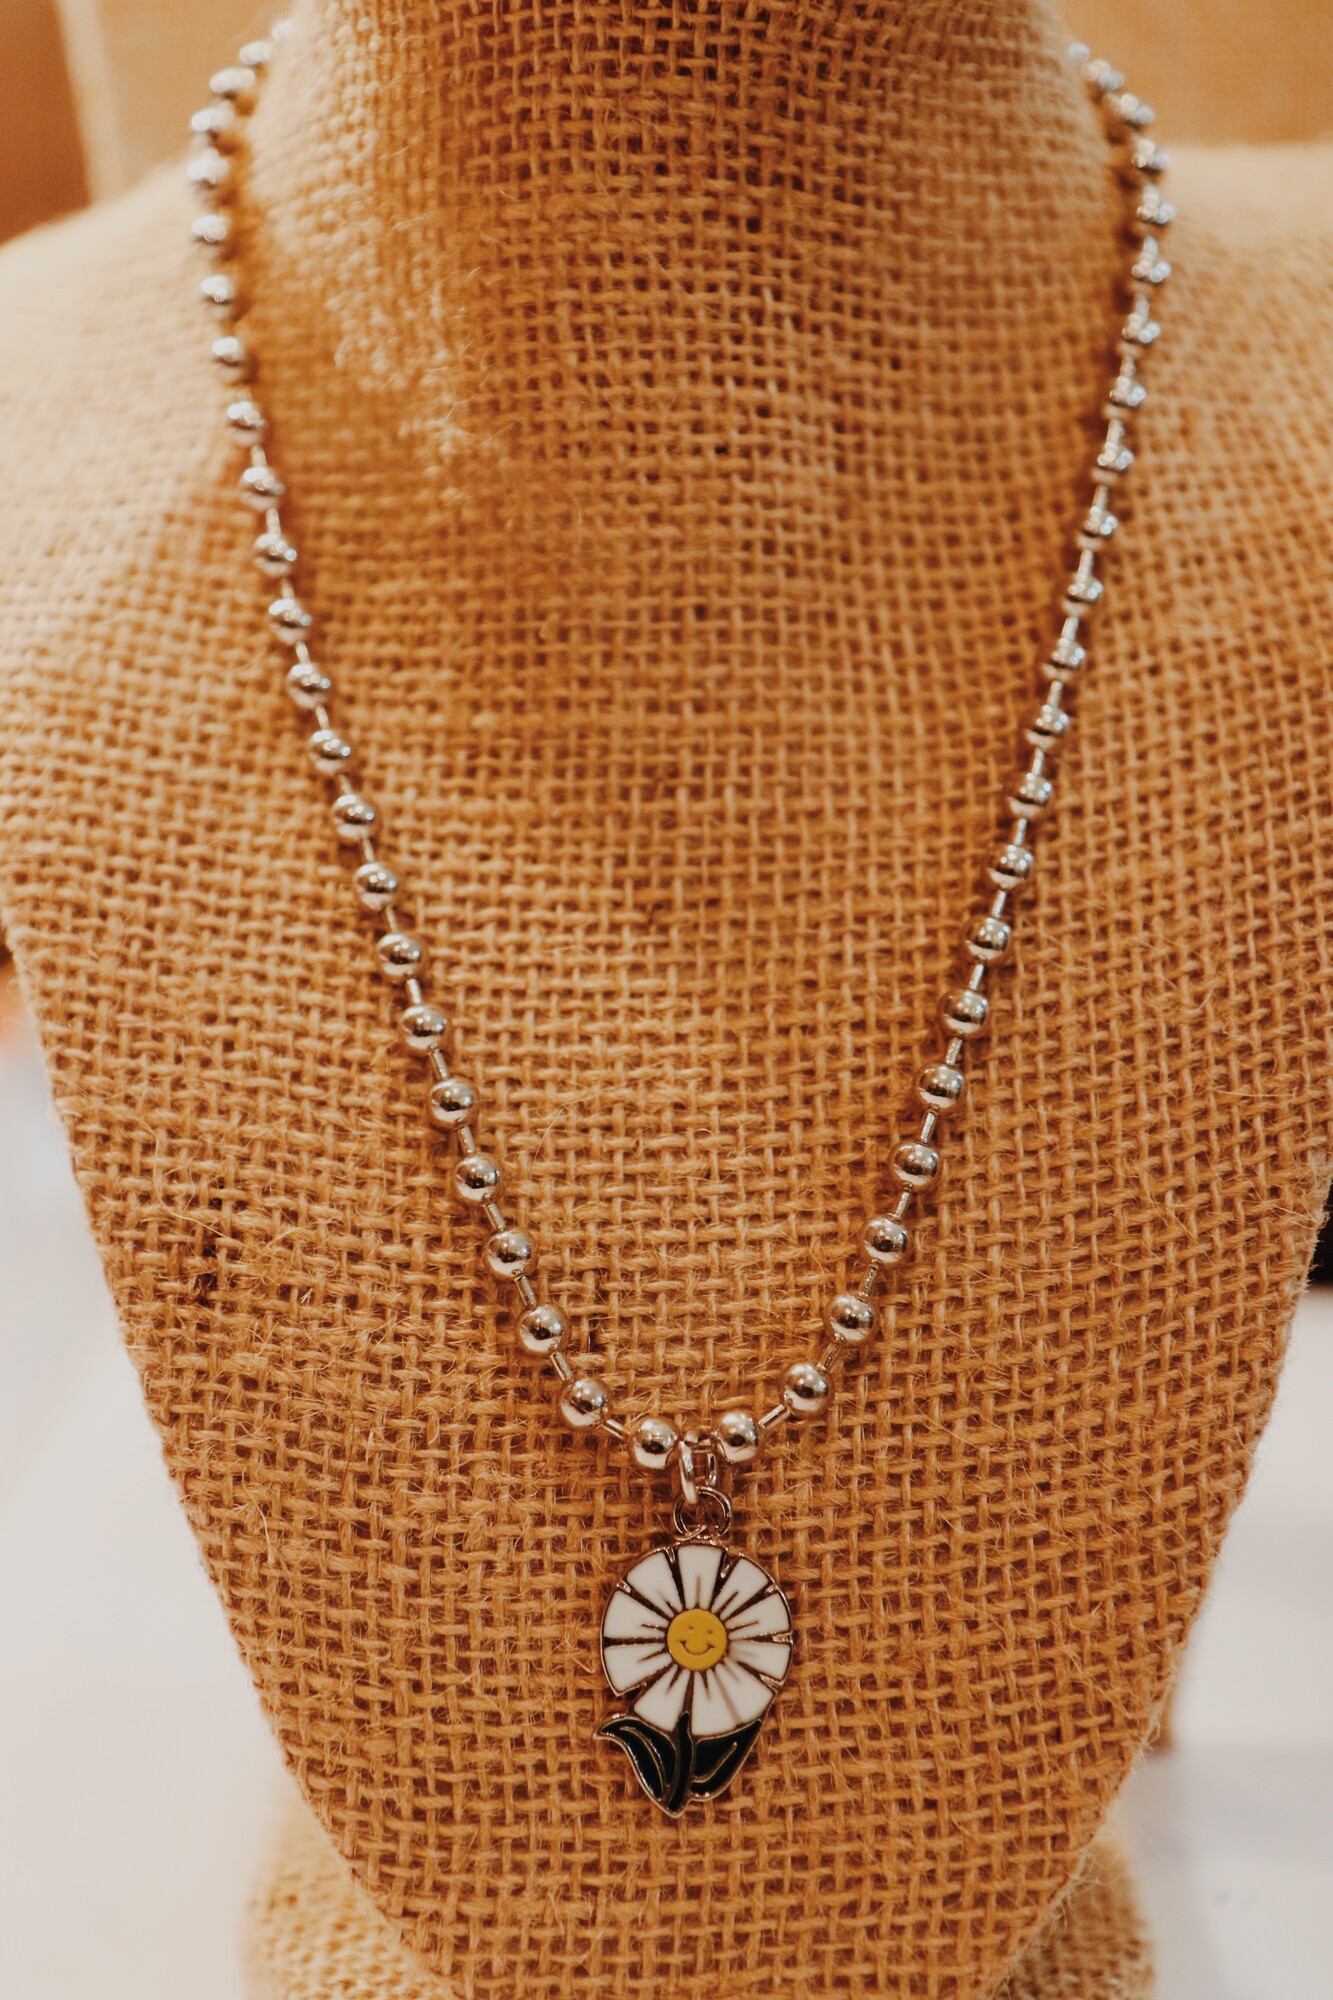 These adorable daisy necklaces by Kelli Hawk Designs are on an 18 inch chian!